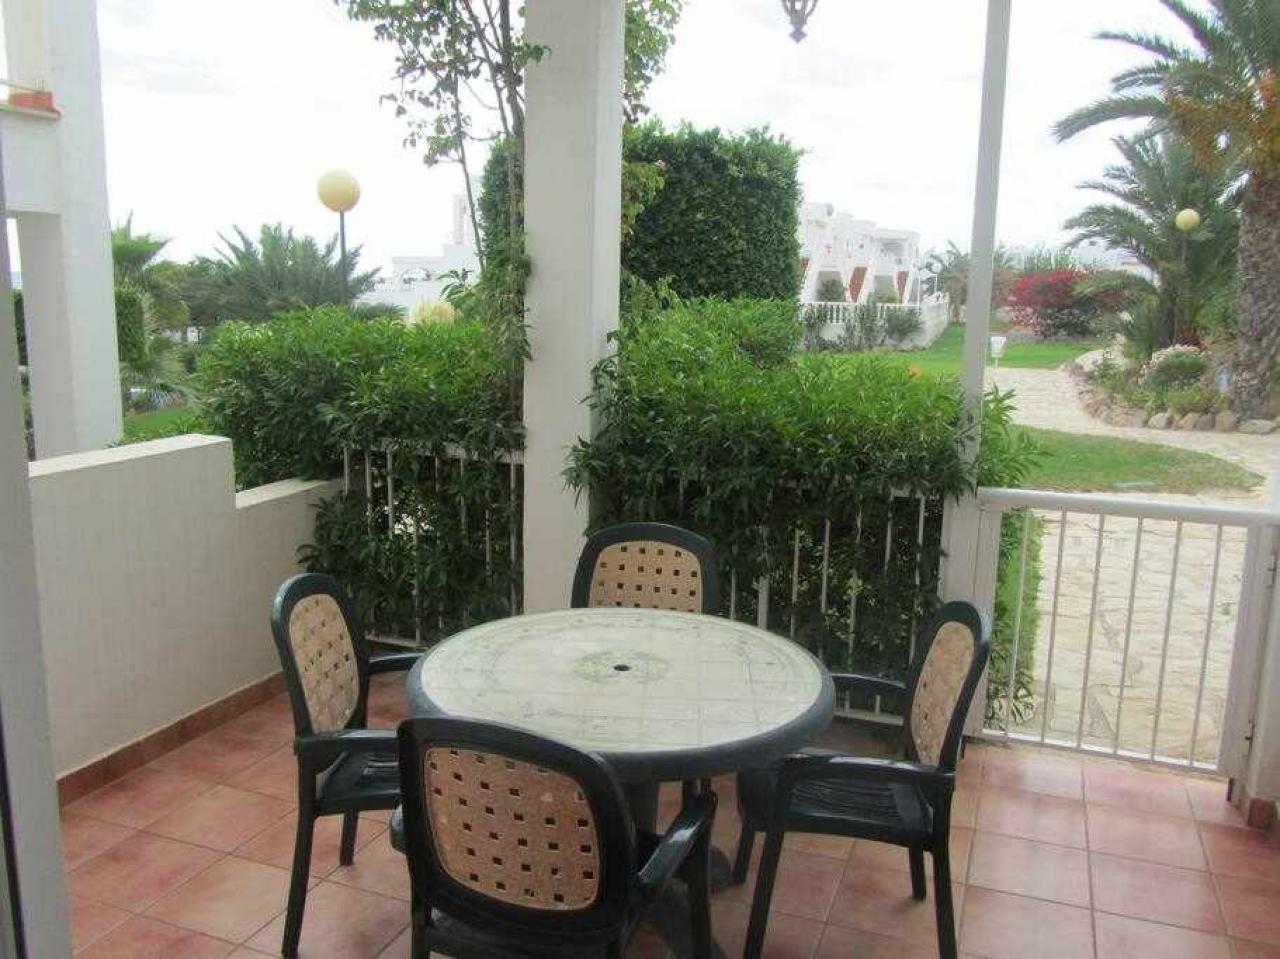 Sunshine lovely townhouse virtually at the beach: Apartment for Rent in Mojácar, Almería